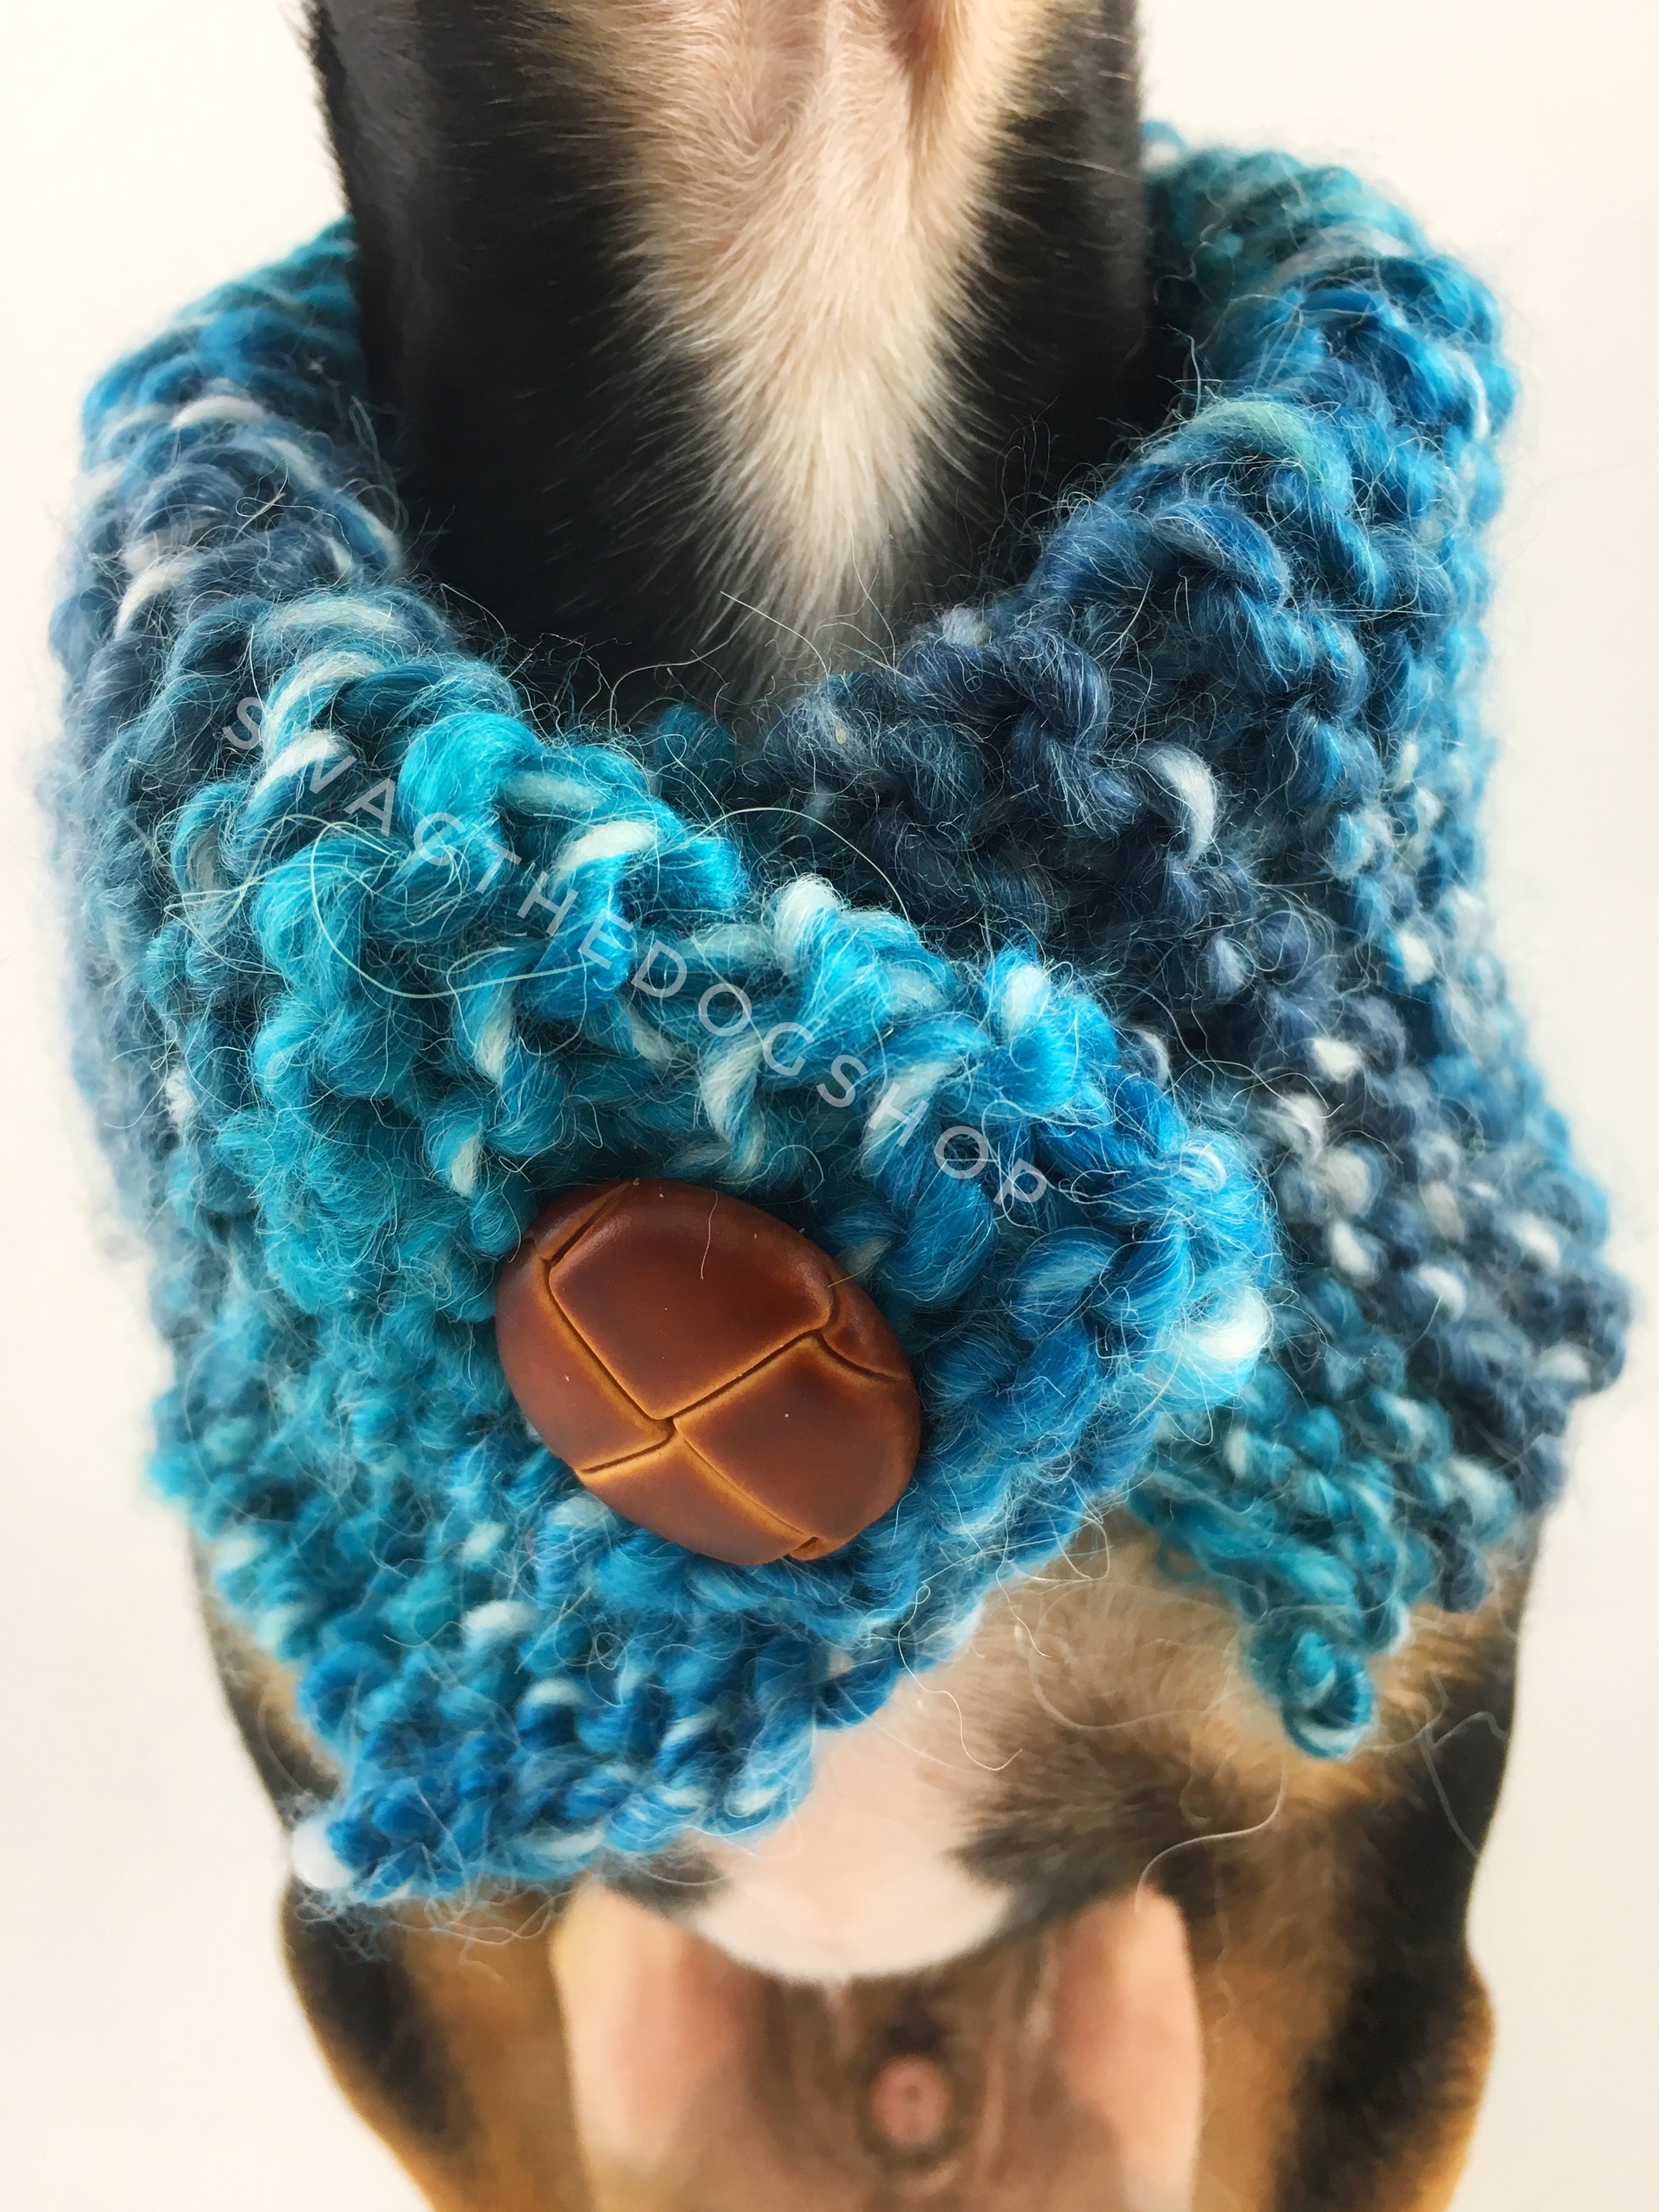 Blue Lagoon Swagsnood - Close Up Neck View of Cute Chihuahua Dog Wearing Spectrum of Blue Color Dog Snood with Accent Button